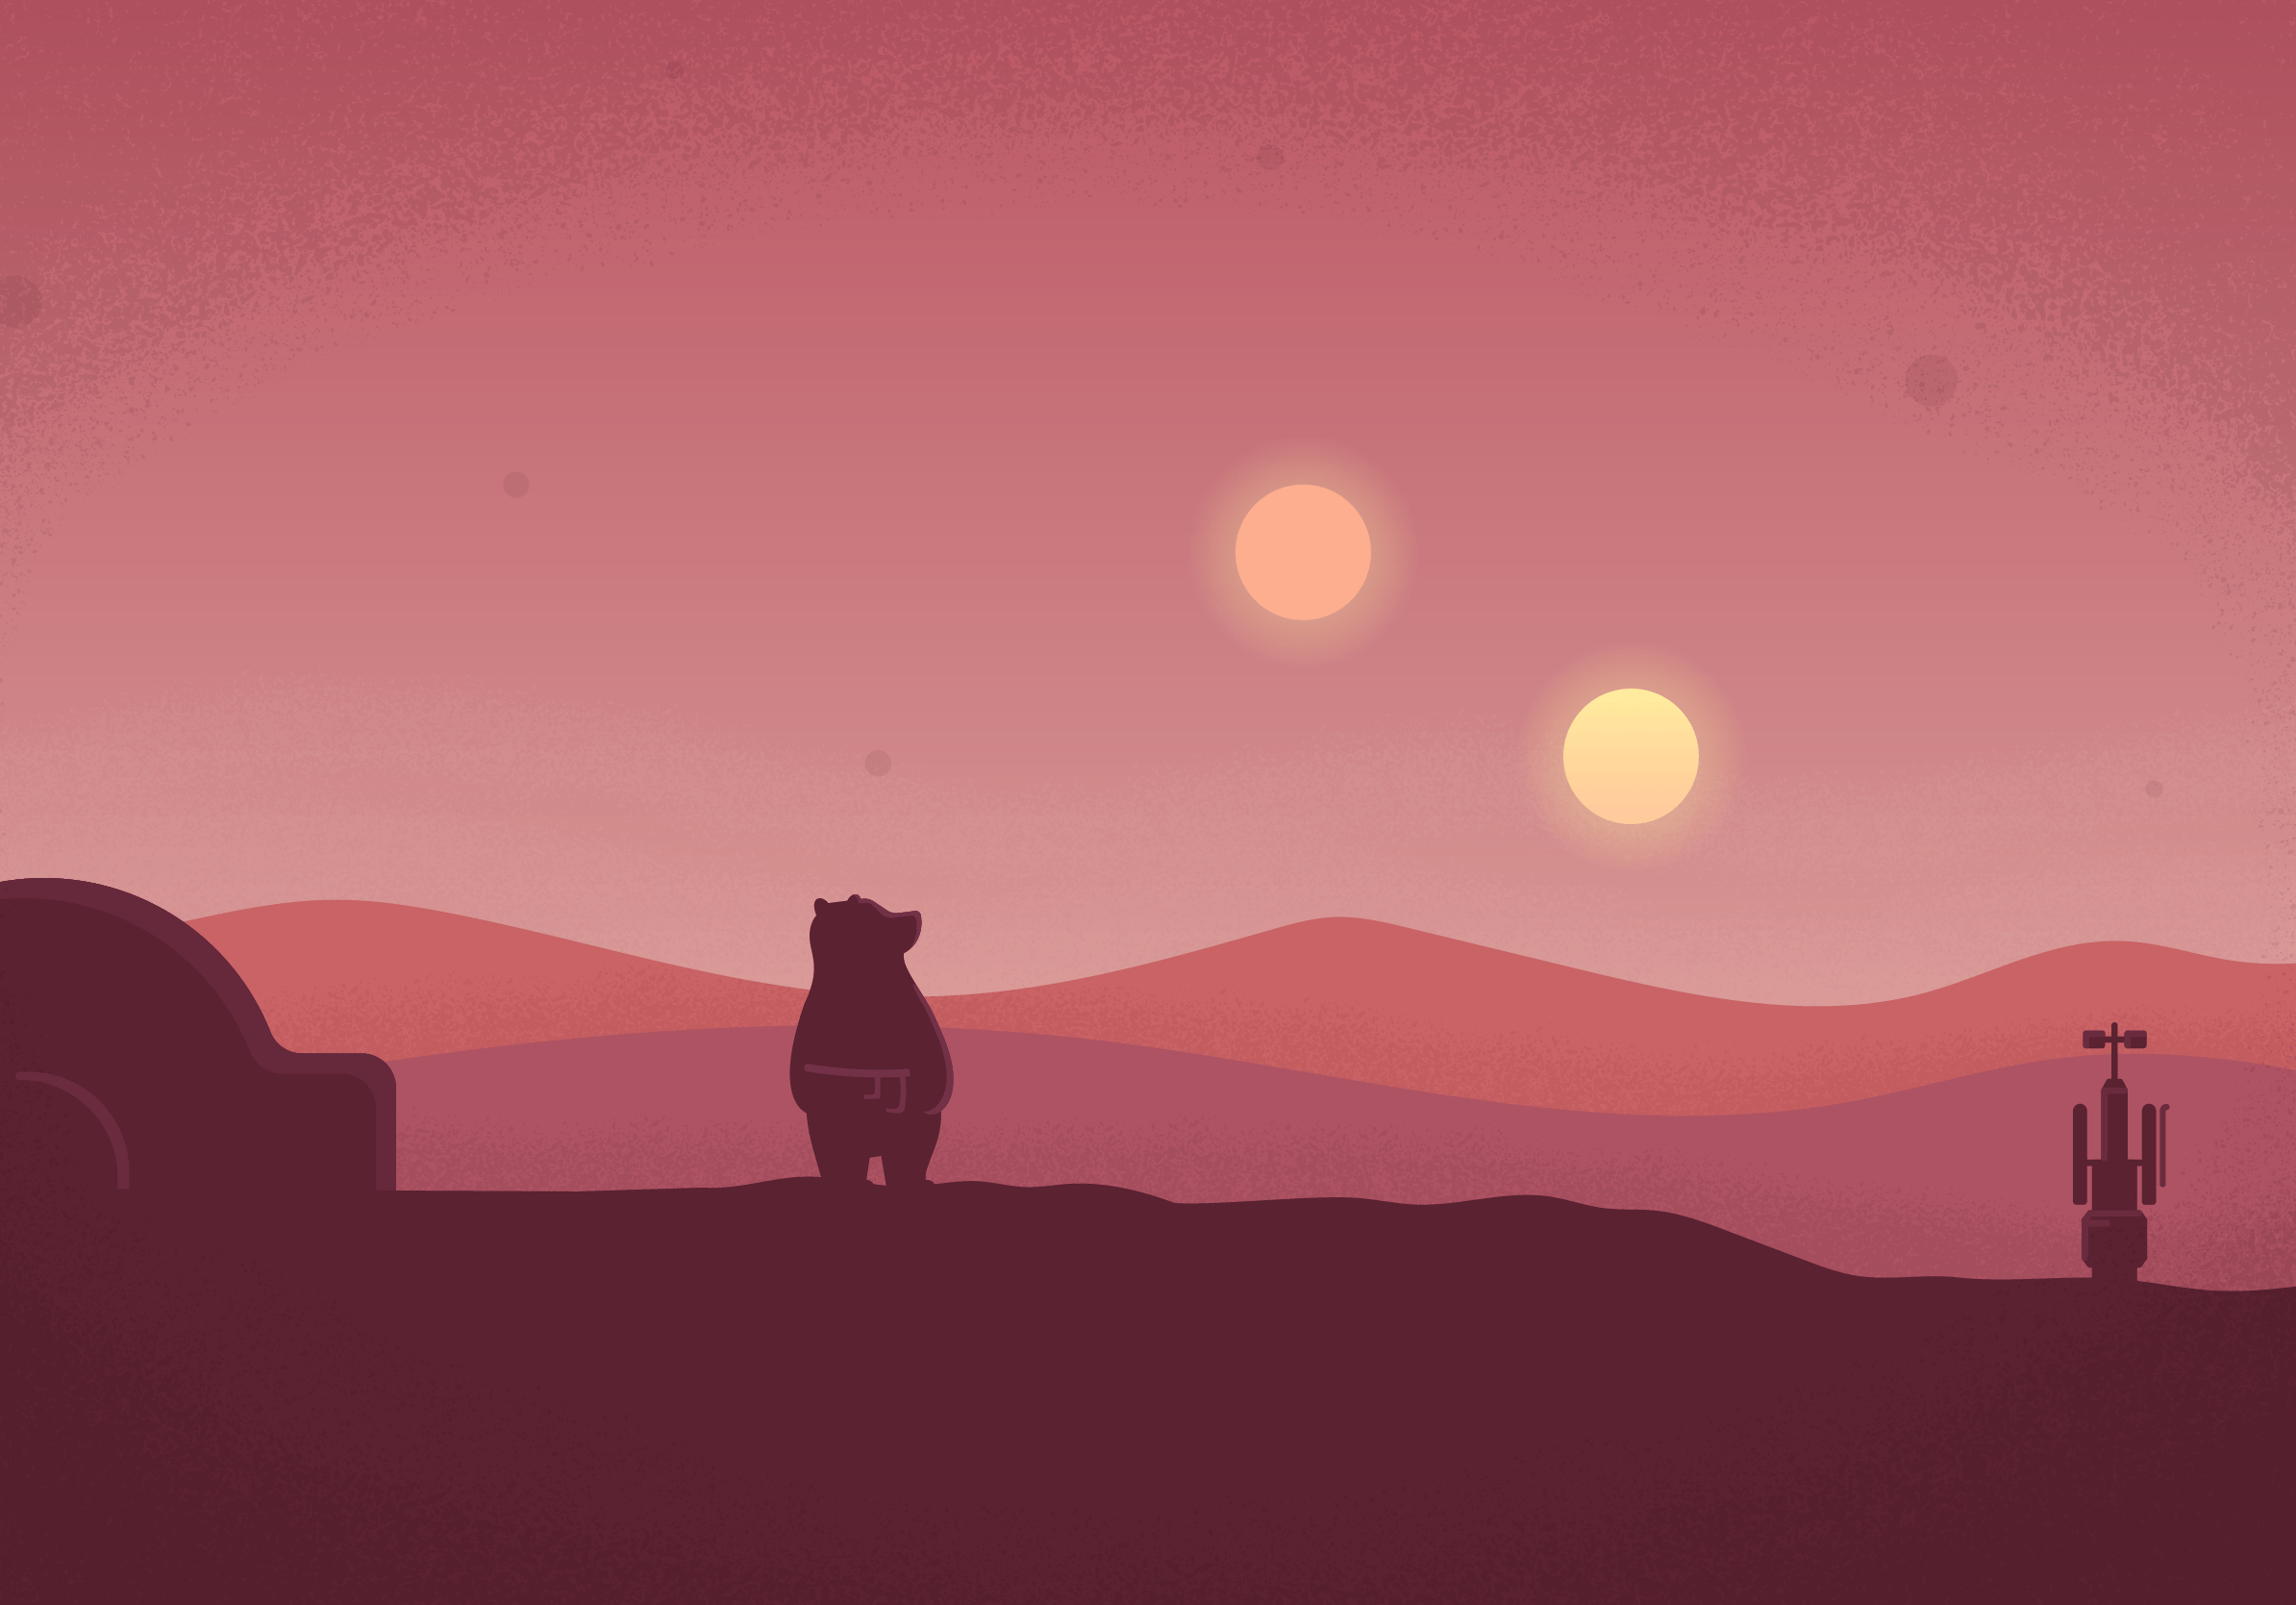 A bear standing on top of some rocks - IPad